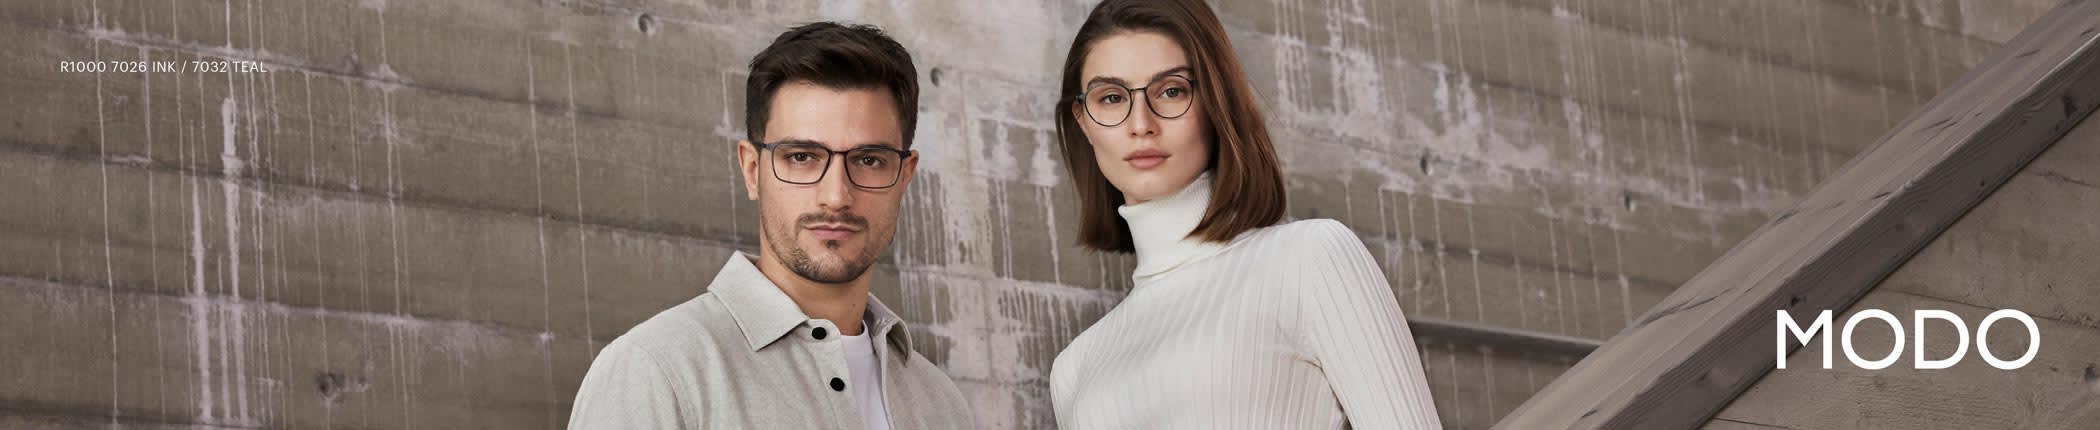 Shop Modo Eyeglasses - featuring 7026 and 7032